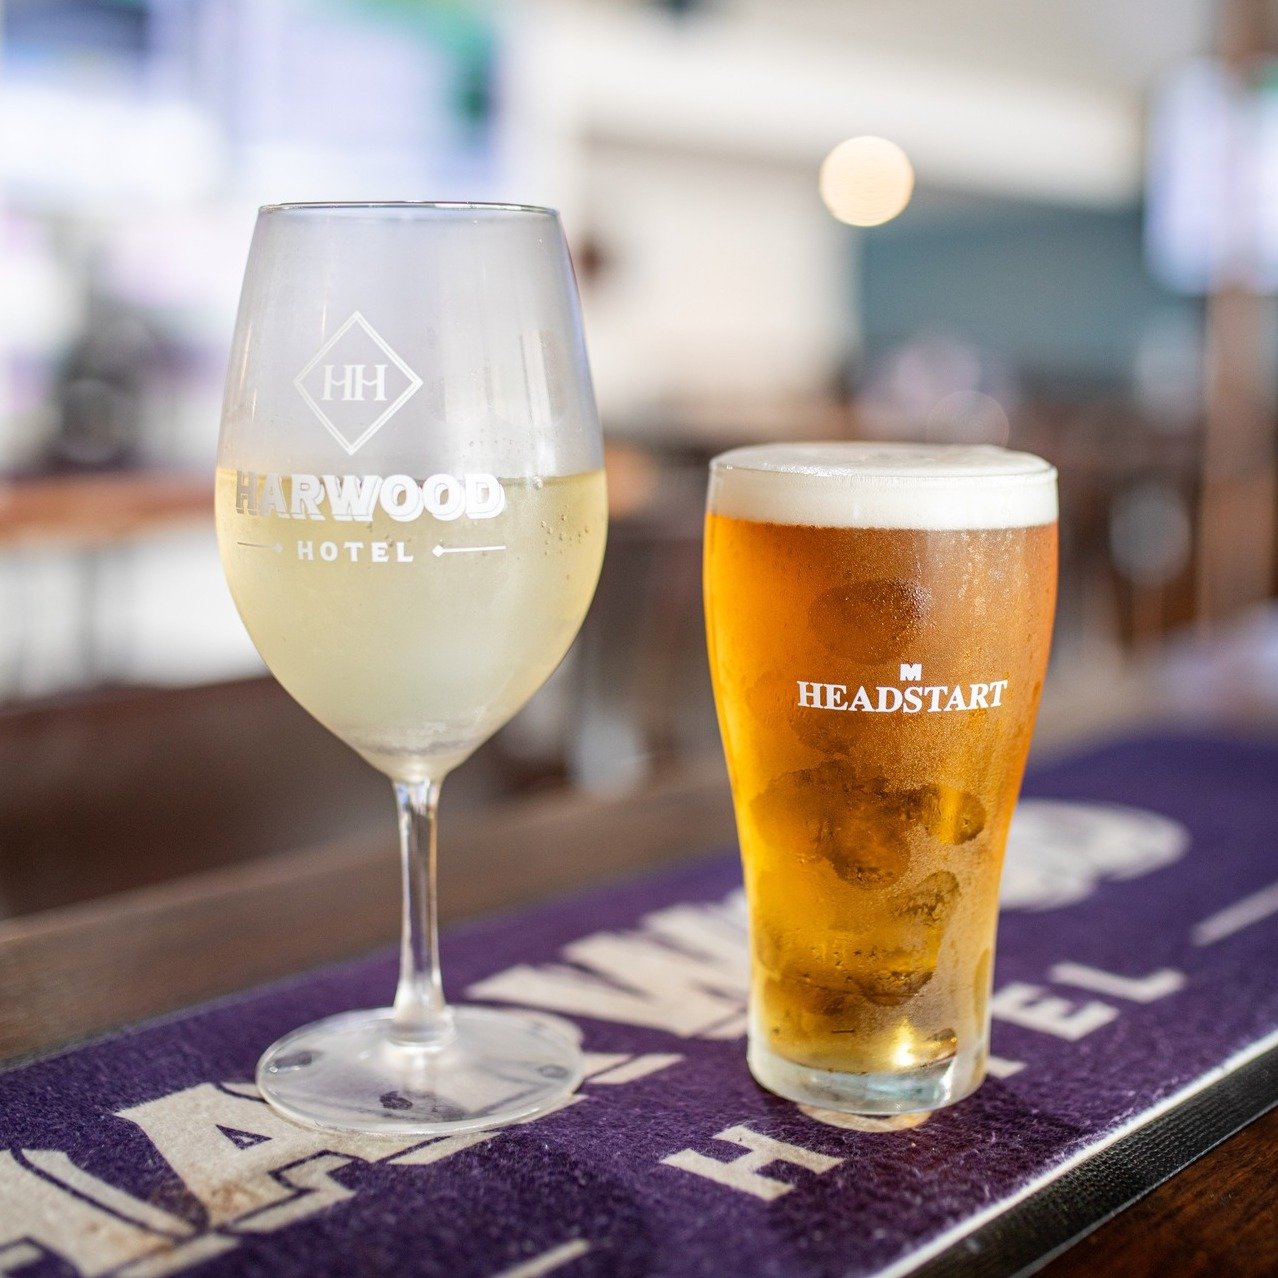 Pre-public holidays taste even sweeter when it&rsquo;s happy hour!

Sip on cheap drinks every weekday from 4pm to 6pm.

#HarwoodHotel #VisitNSW #CountryPub